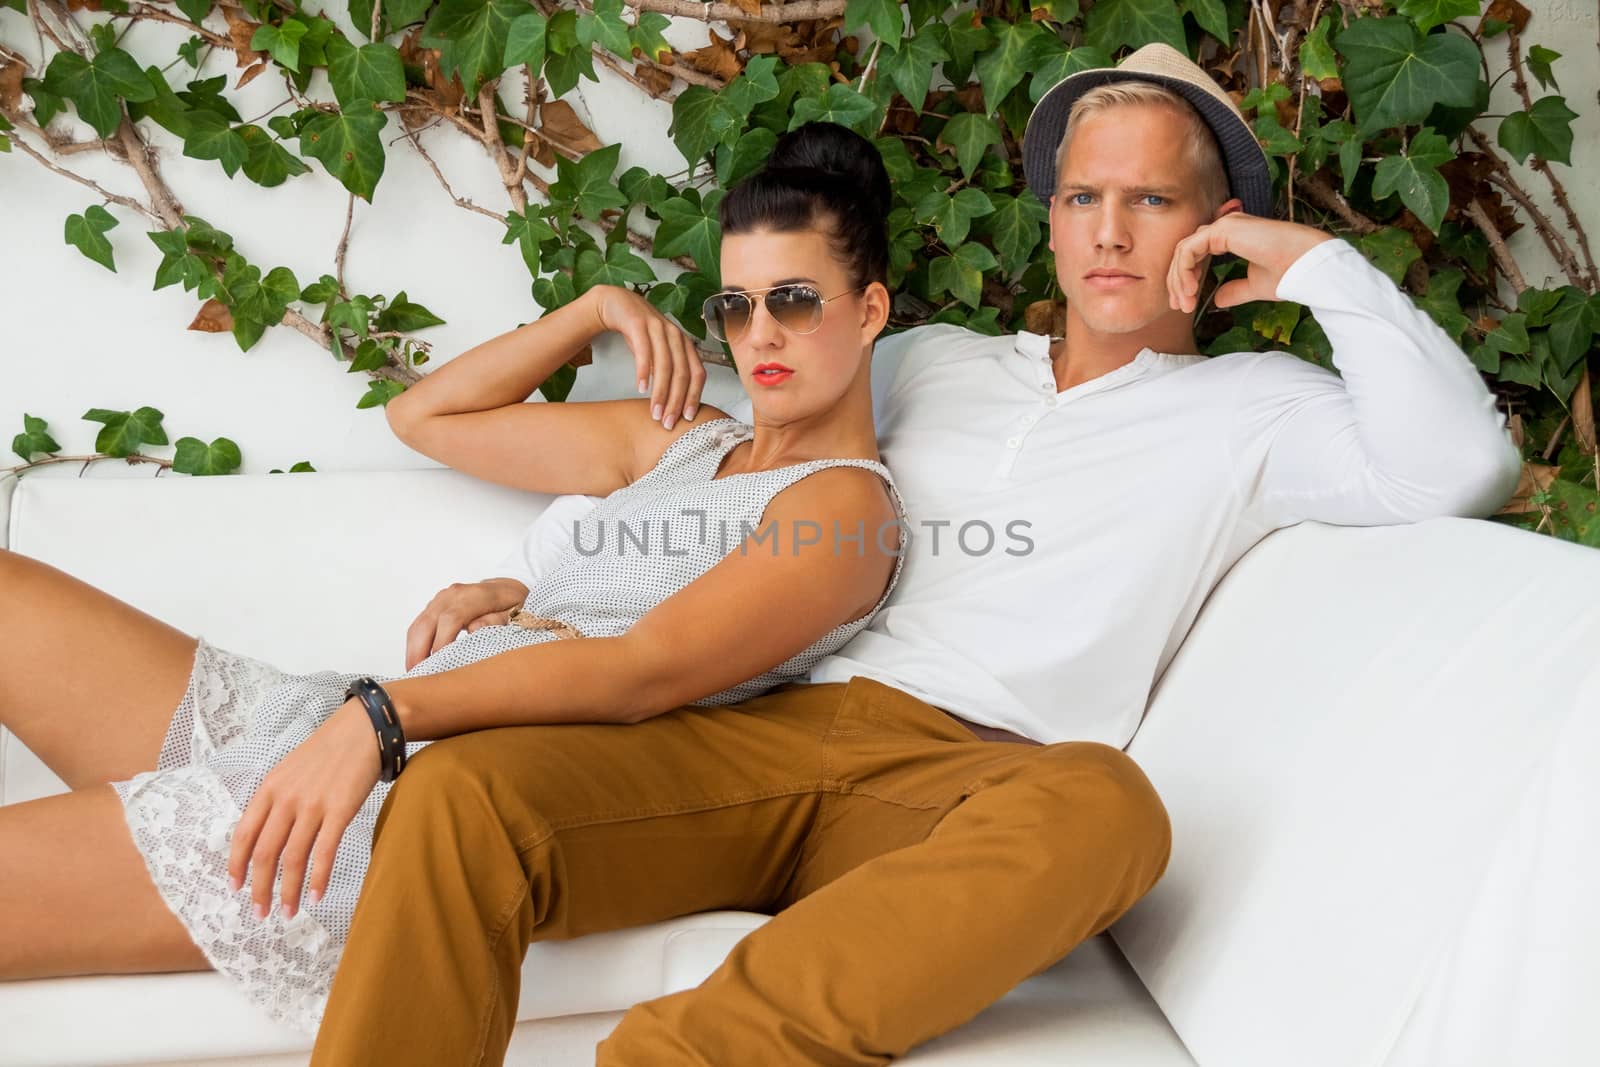 Elegant trendy young couple in fashionable modern clothes and accessories posing outdoors in the summer sunshine in a garden or park